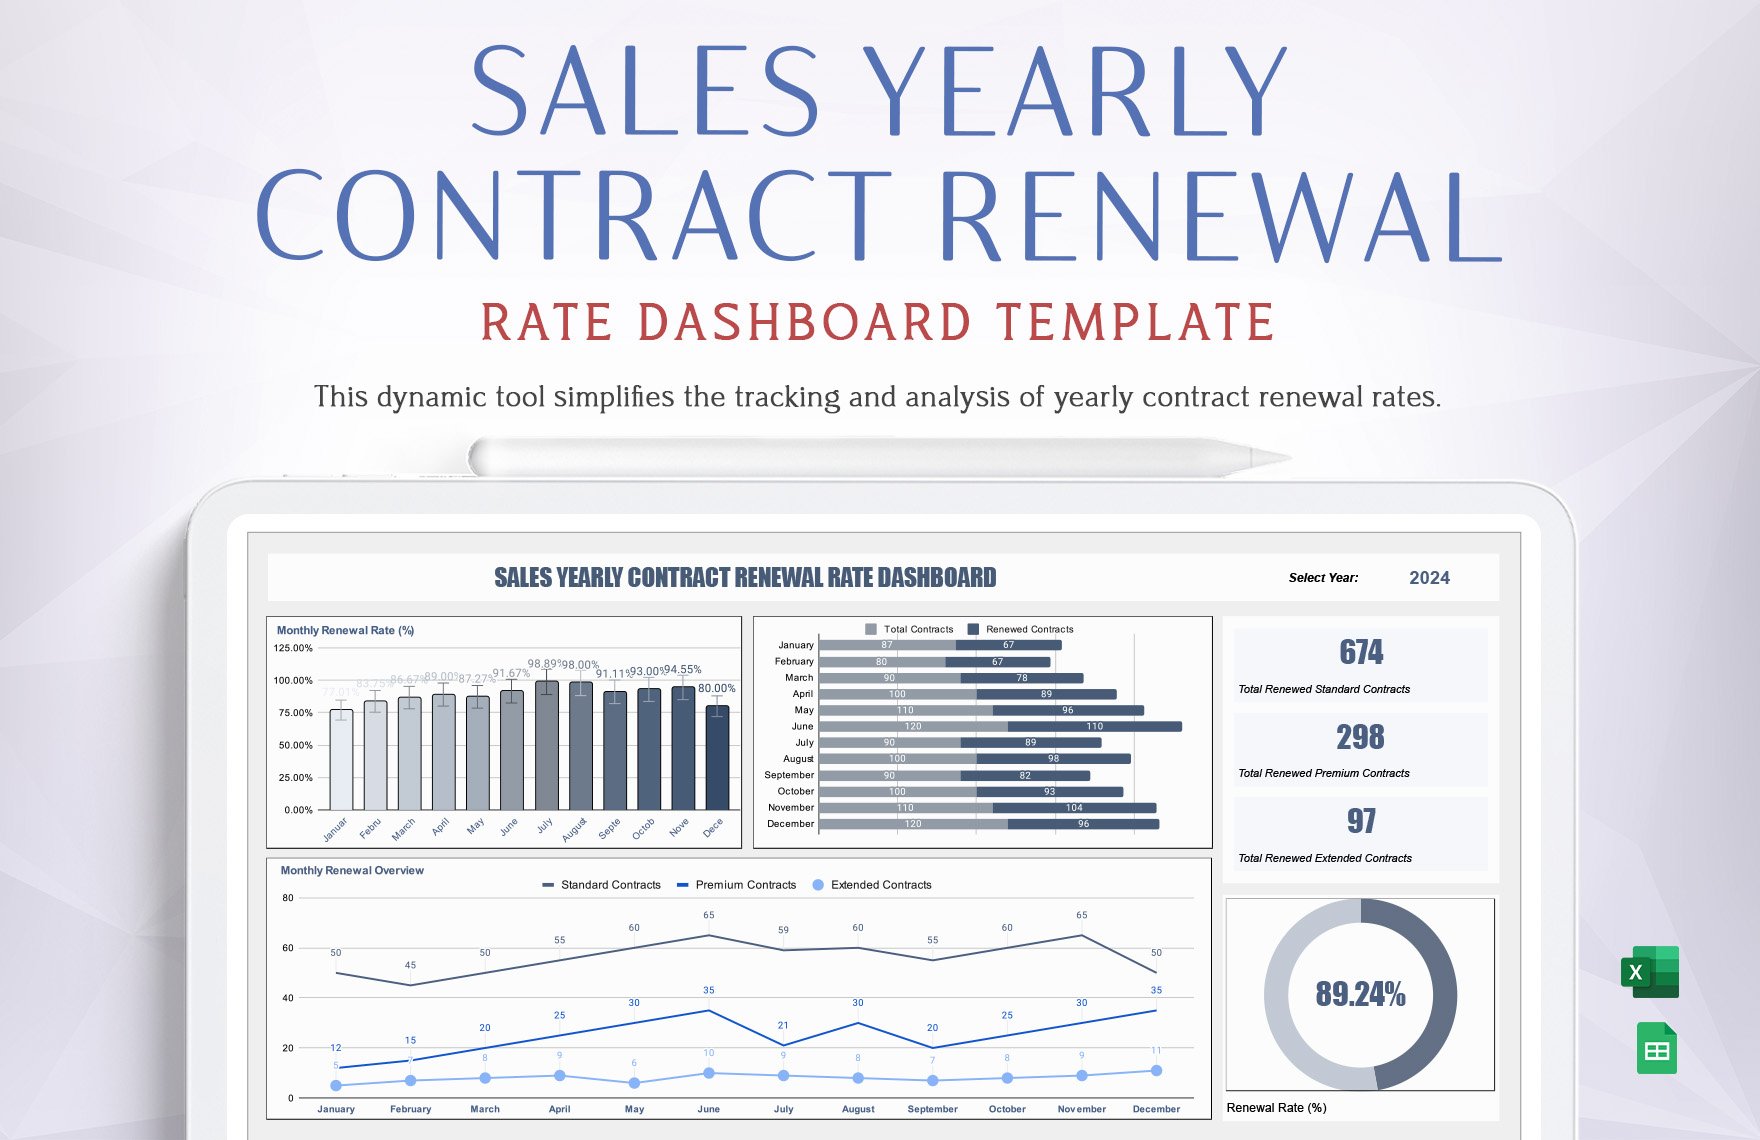 Sales Yearly Contract Renewal Rate Dashboard Template